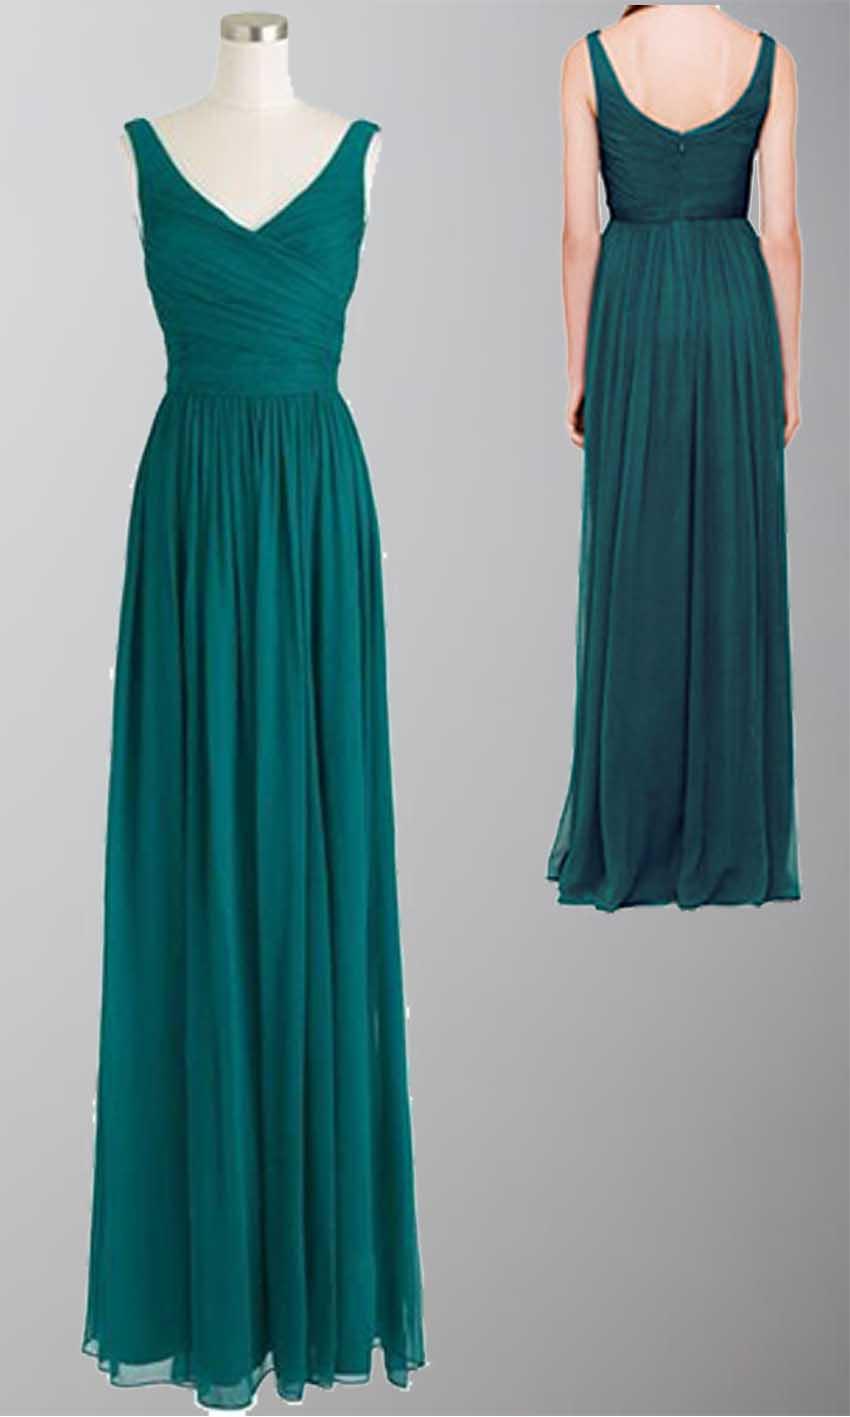 Свадьба - Long Chiffon Rich Peacock Bridesmaid Dresses KSP177 [KSP177] - £92.00 : Cheap Prom Dresses Uk, Bridesmaid Dresses, 2014 Prom & Evening Dresses, Look for cheap elegant prom dresses 2014, cocktail gowns, or dresses for special occasions? kissprom.co.uk offe